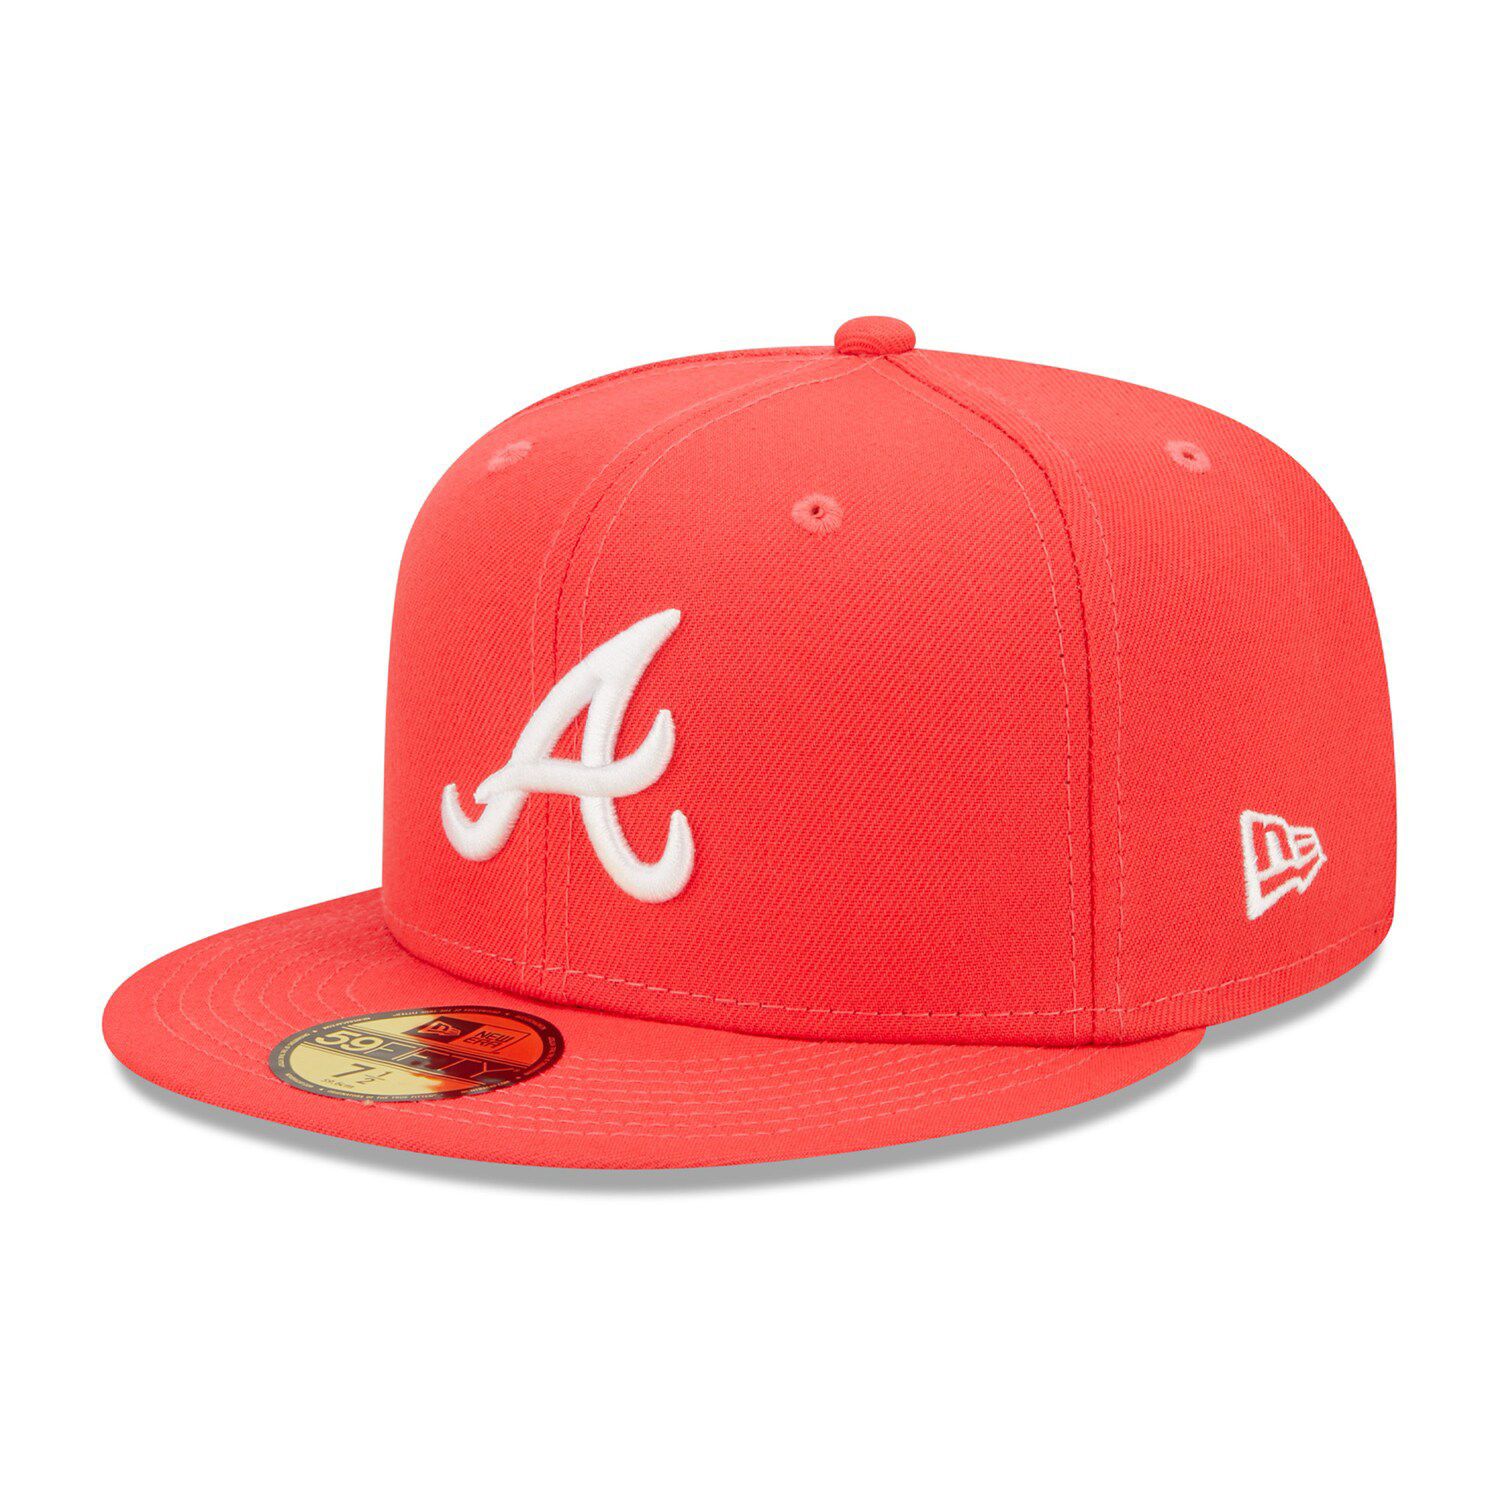 Atlanta Braves Khaki Clean Up Adjustable Hat, Adult One Size Fits All